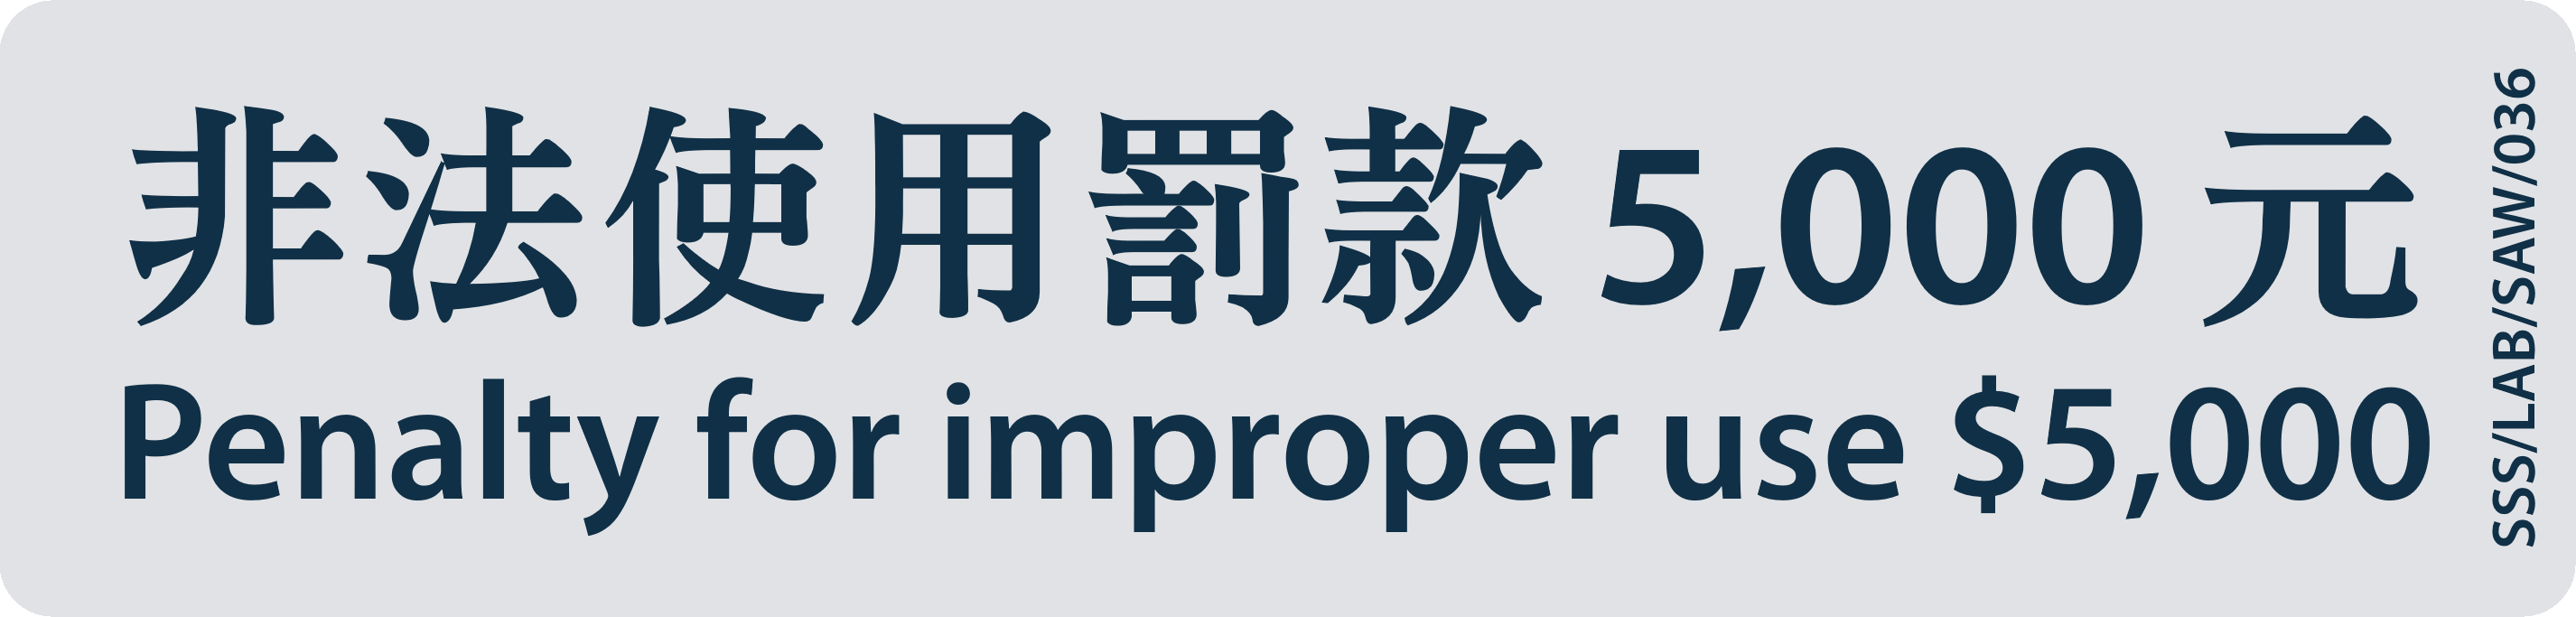 MTR sticker: Penalty for improper use $5,000